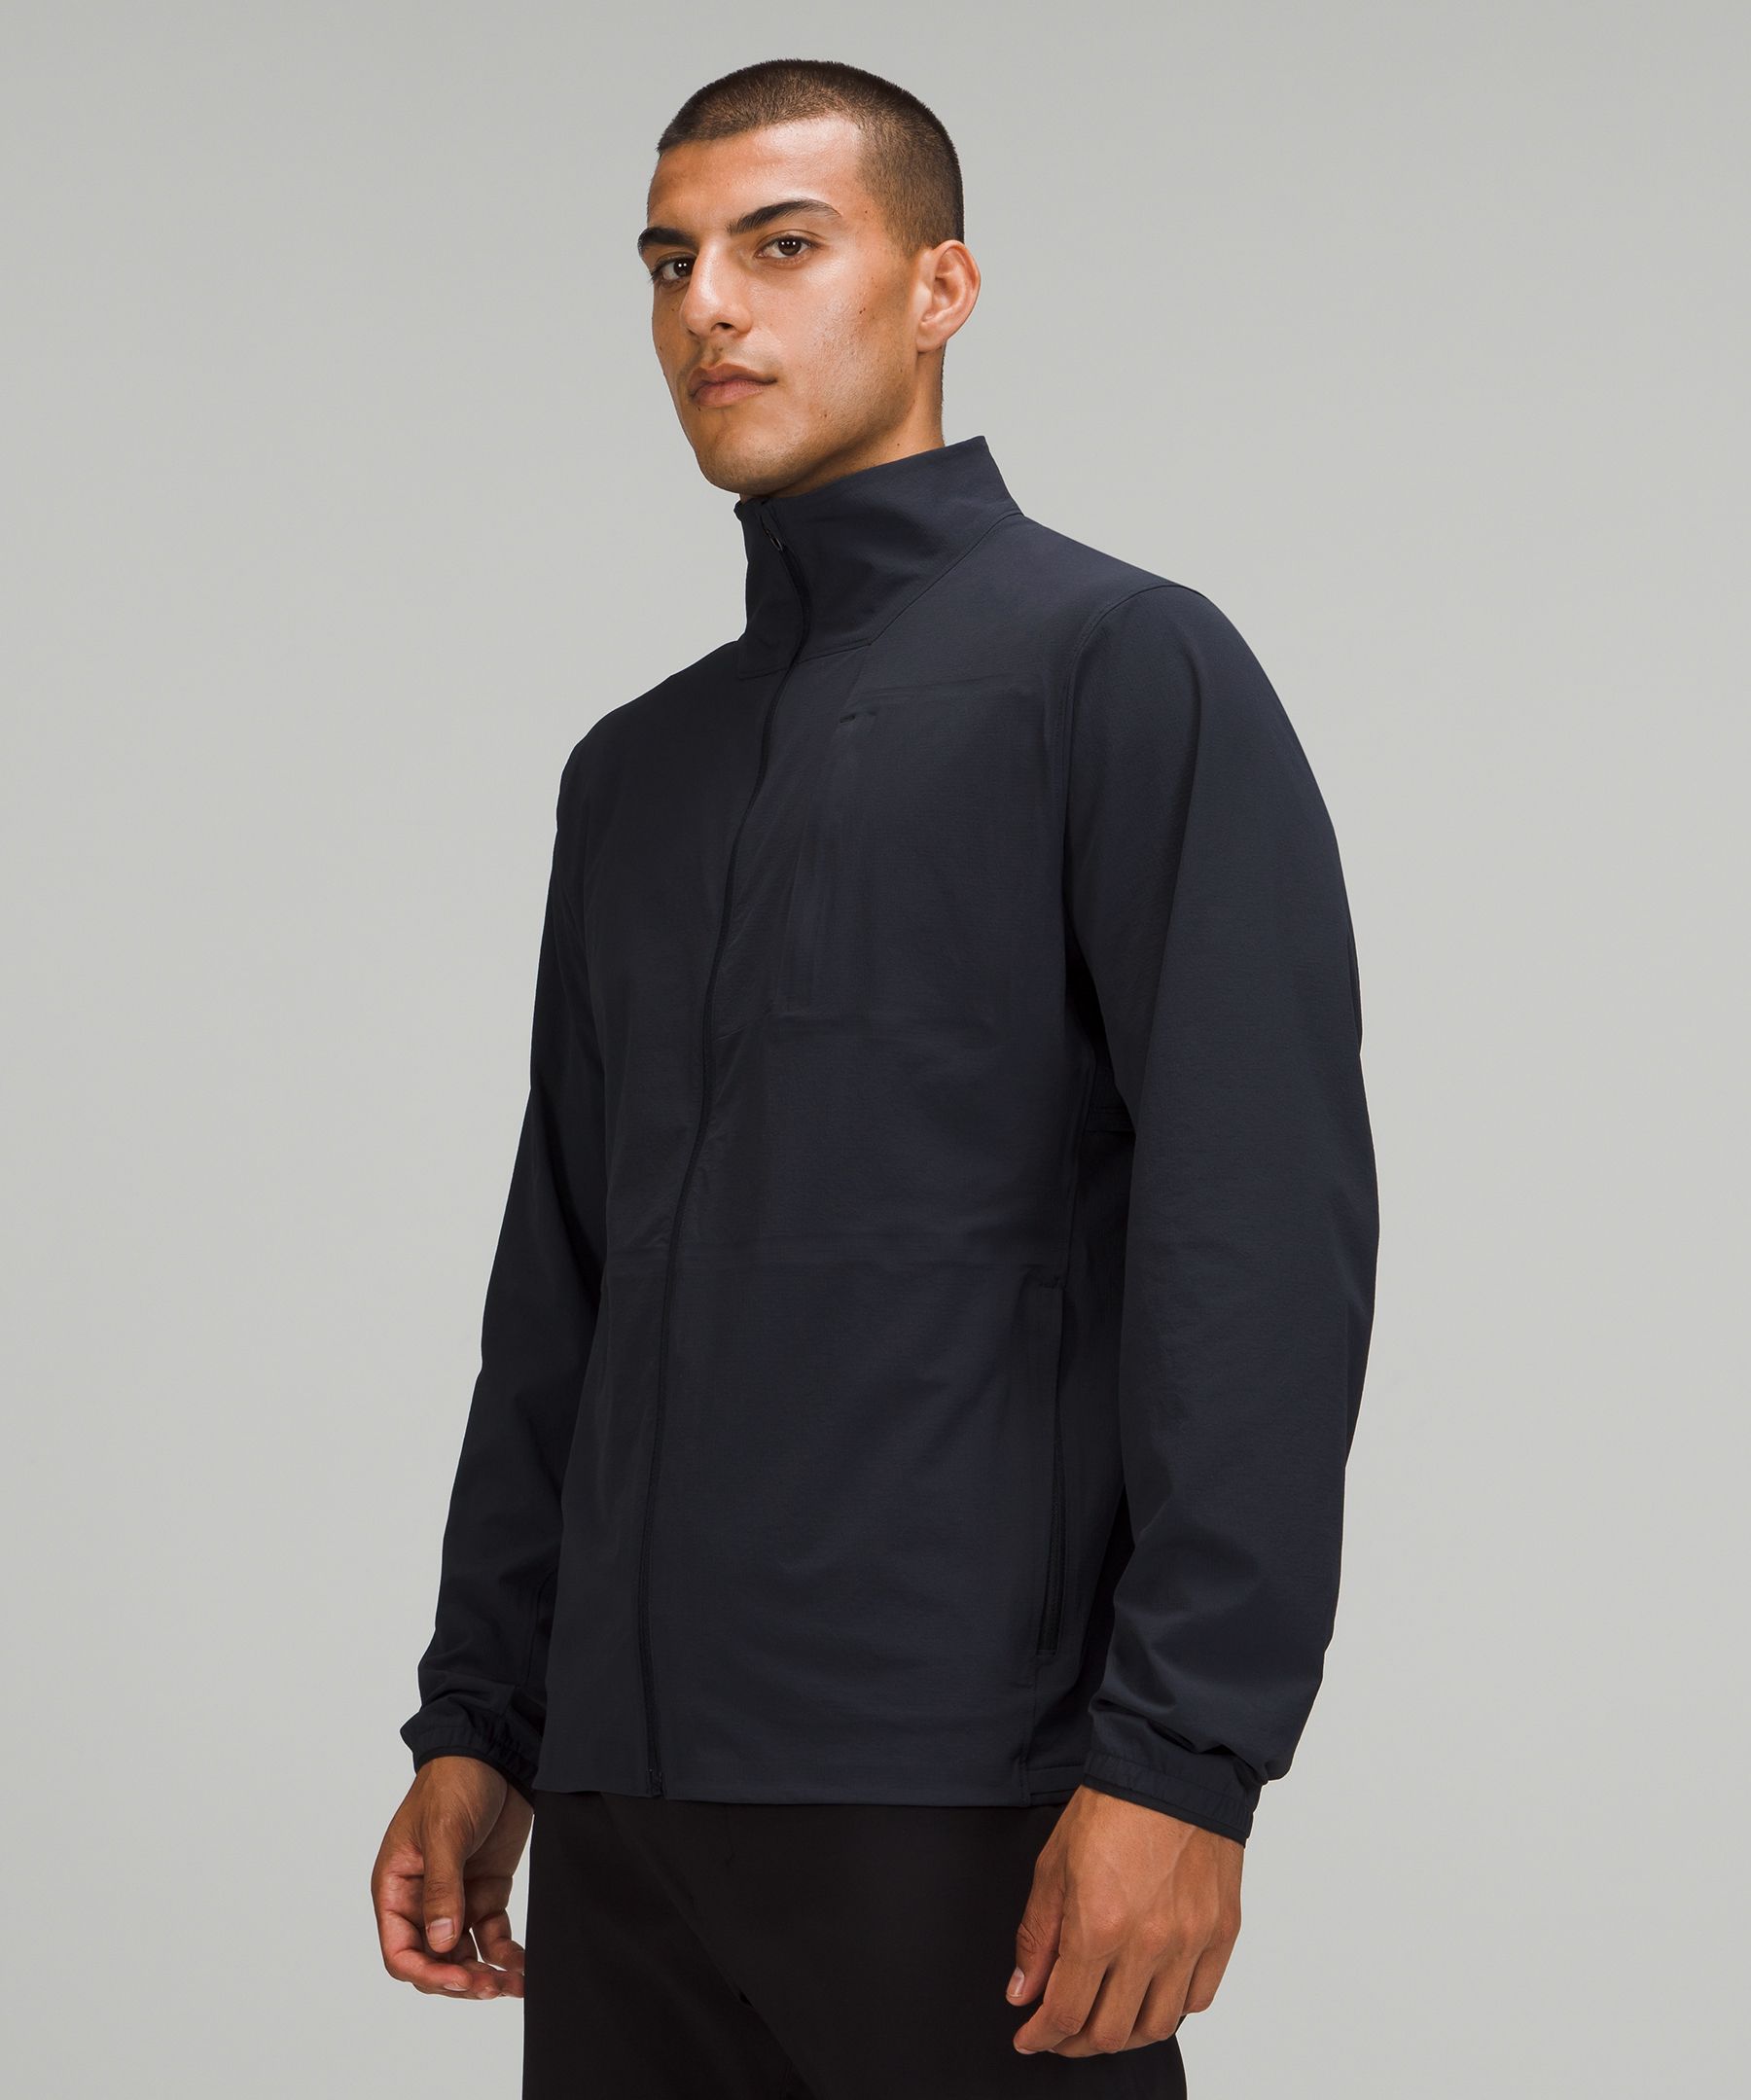 Lululemon Expeditionist Jacket In Classic Navy | ModeSens